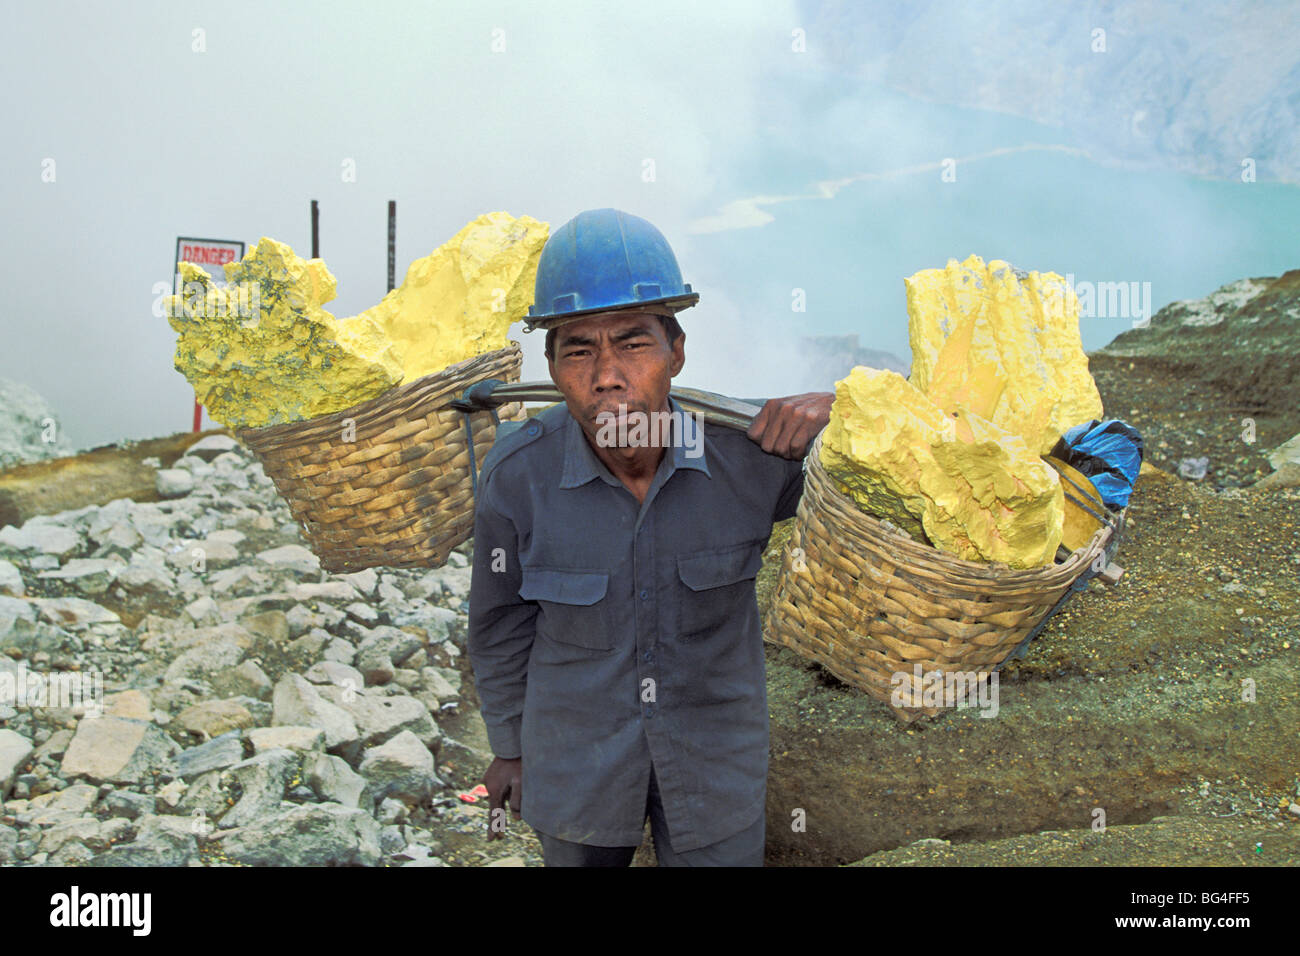 Man engaged in sulphur mining, a back-breaking and dangerous job in the Kawah Ijen Crater, Ijen Volcano, East Java, Indonesia Stock Photo